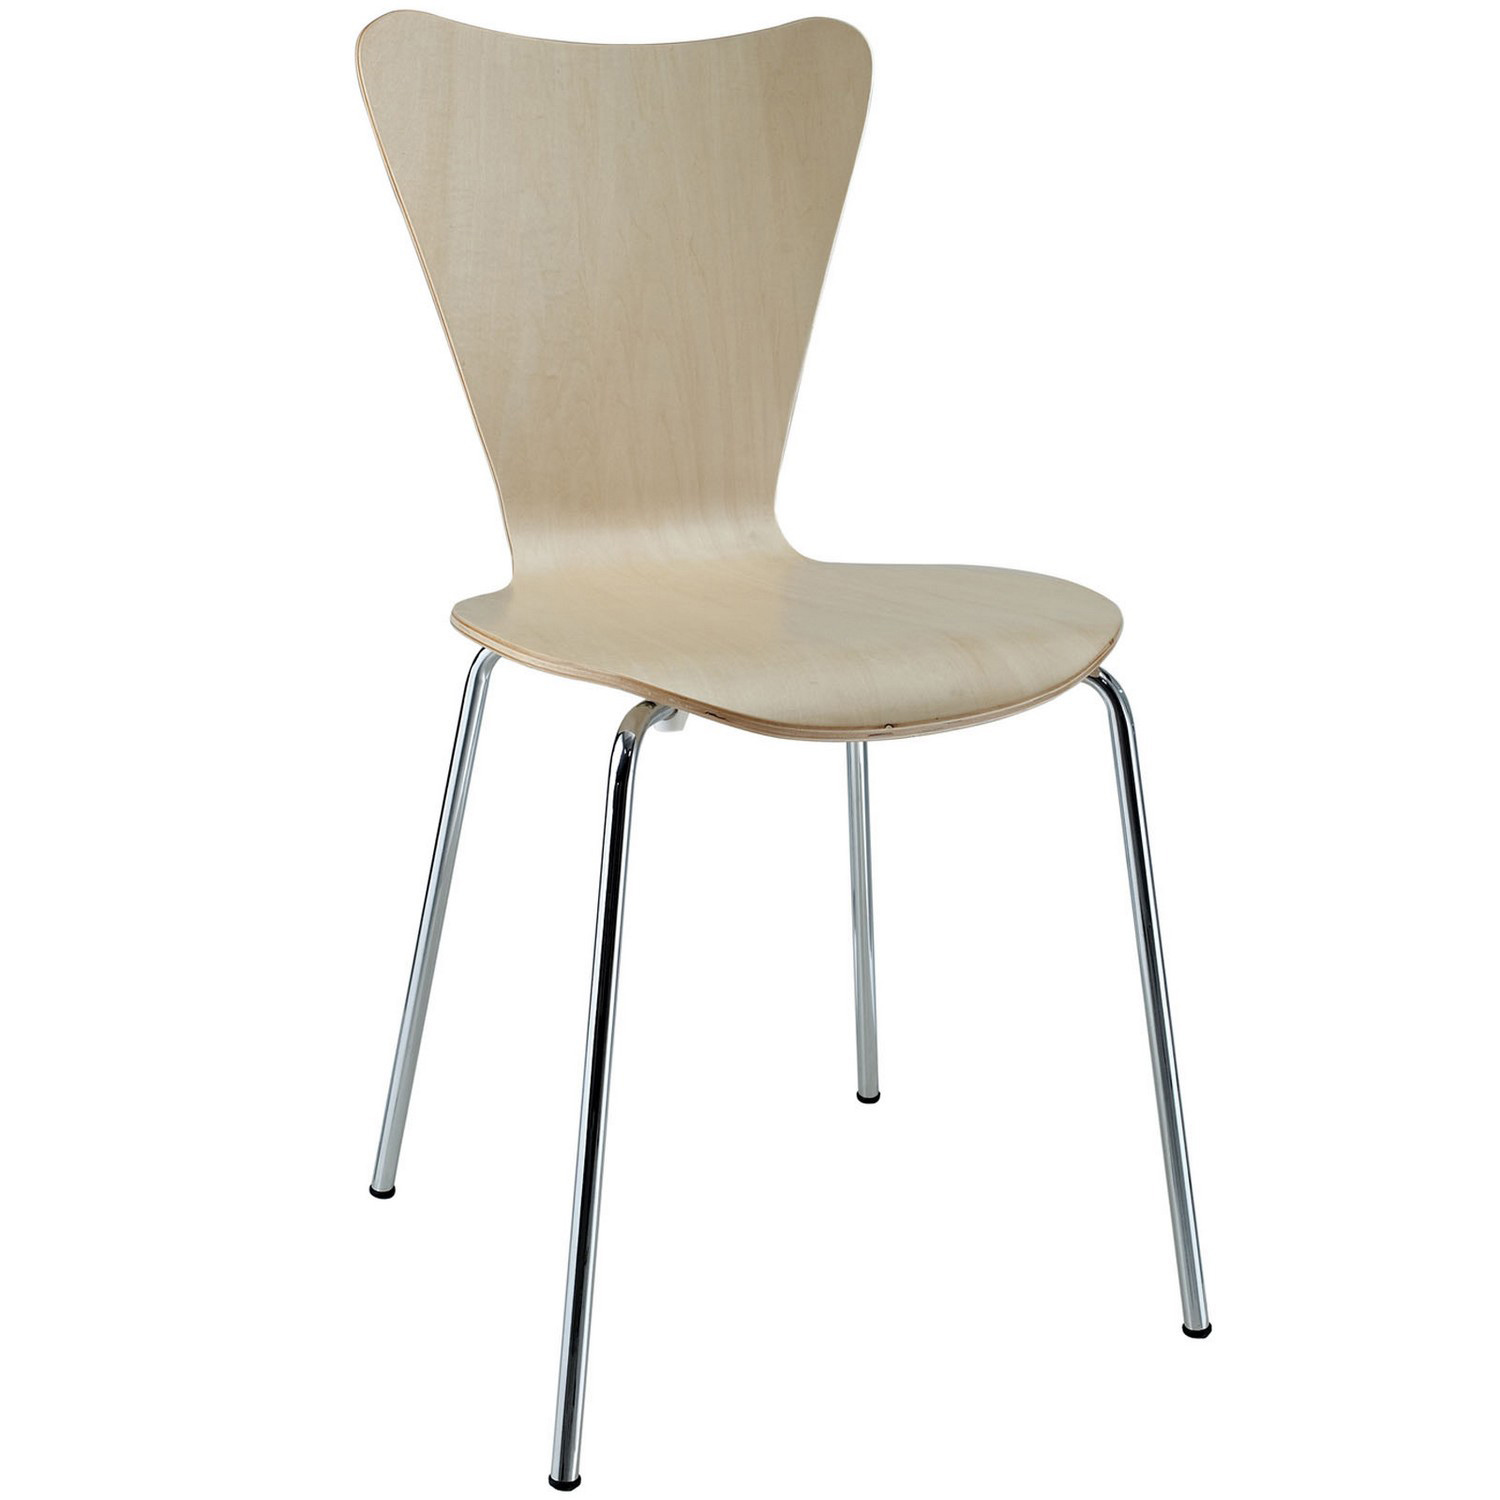 Modway Ernie Dining Side Chair - Natural